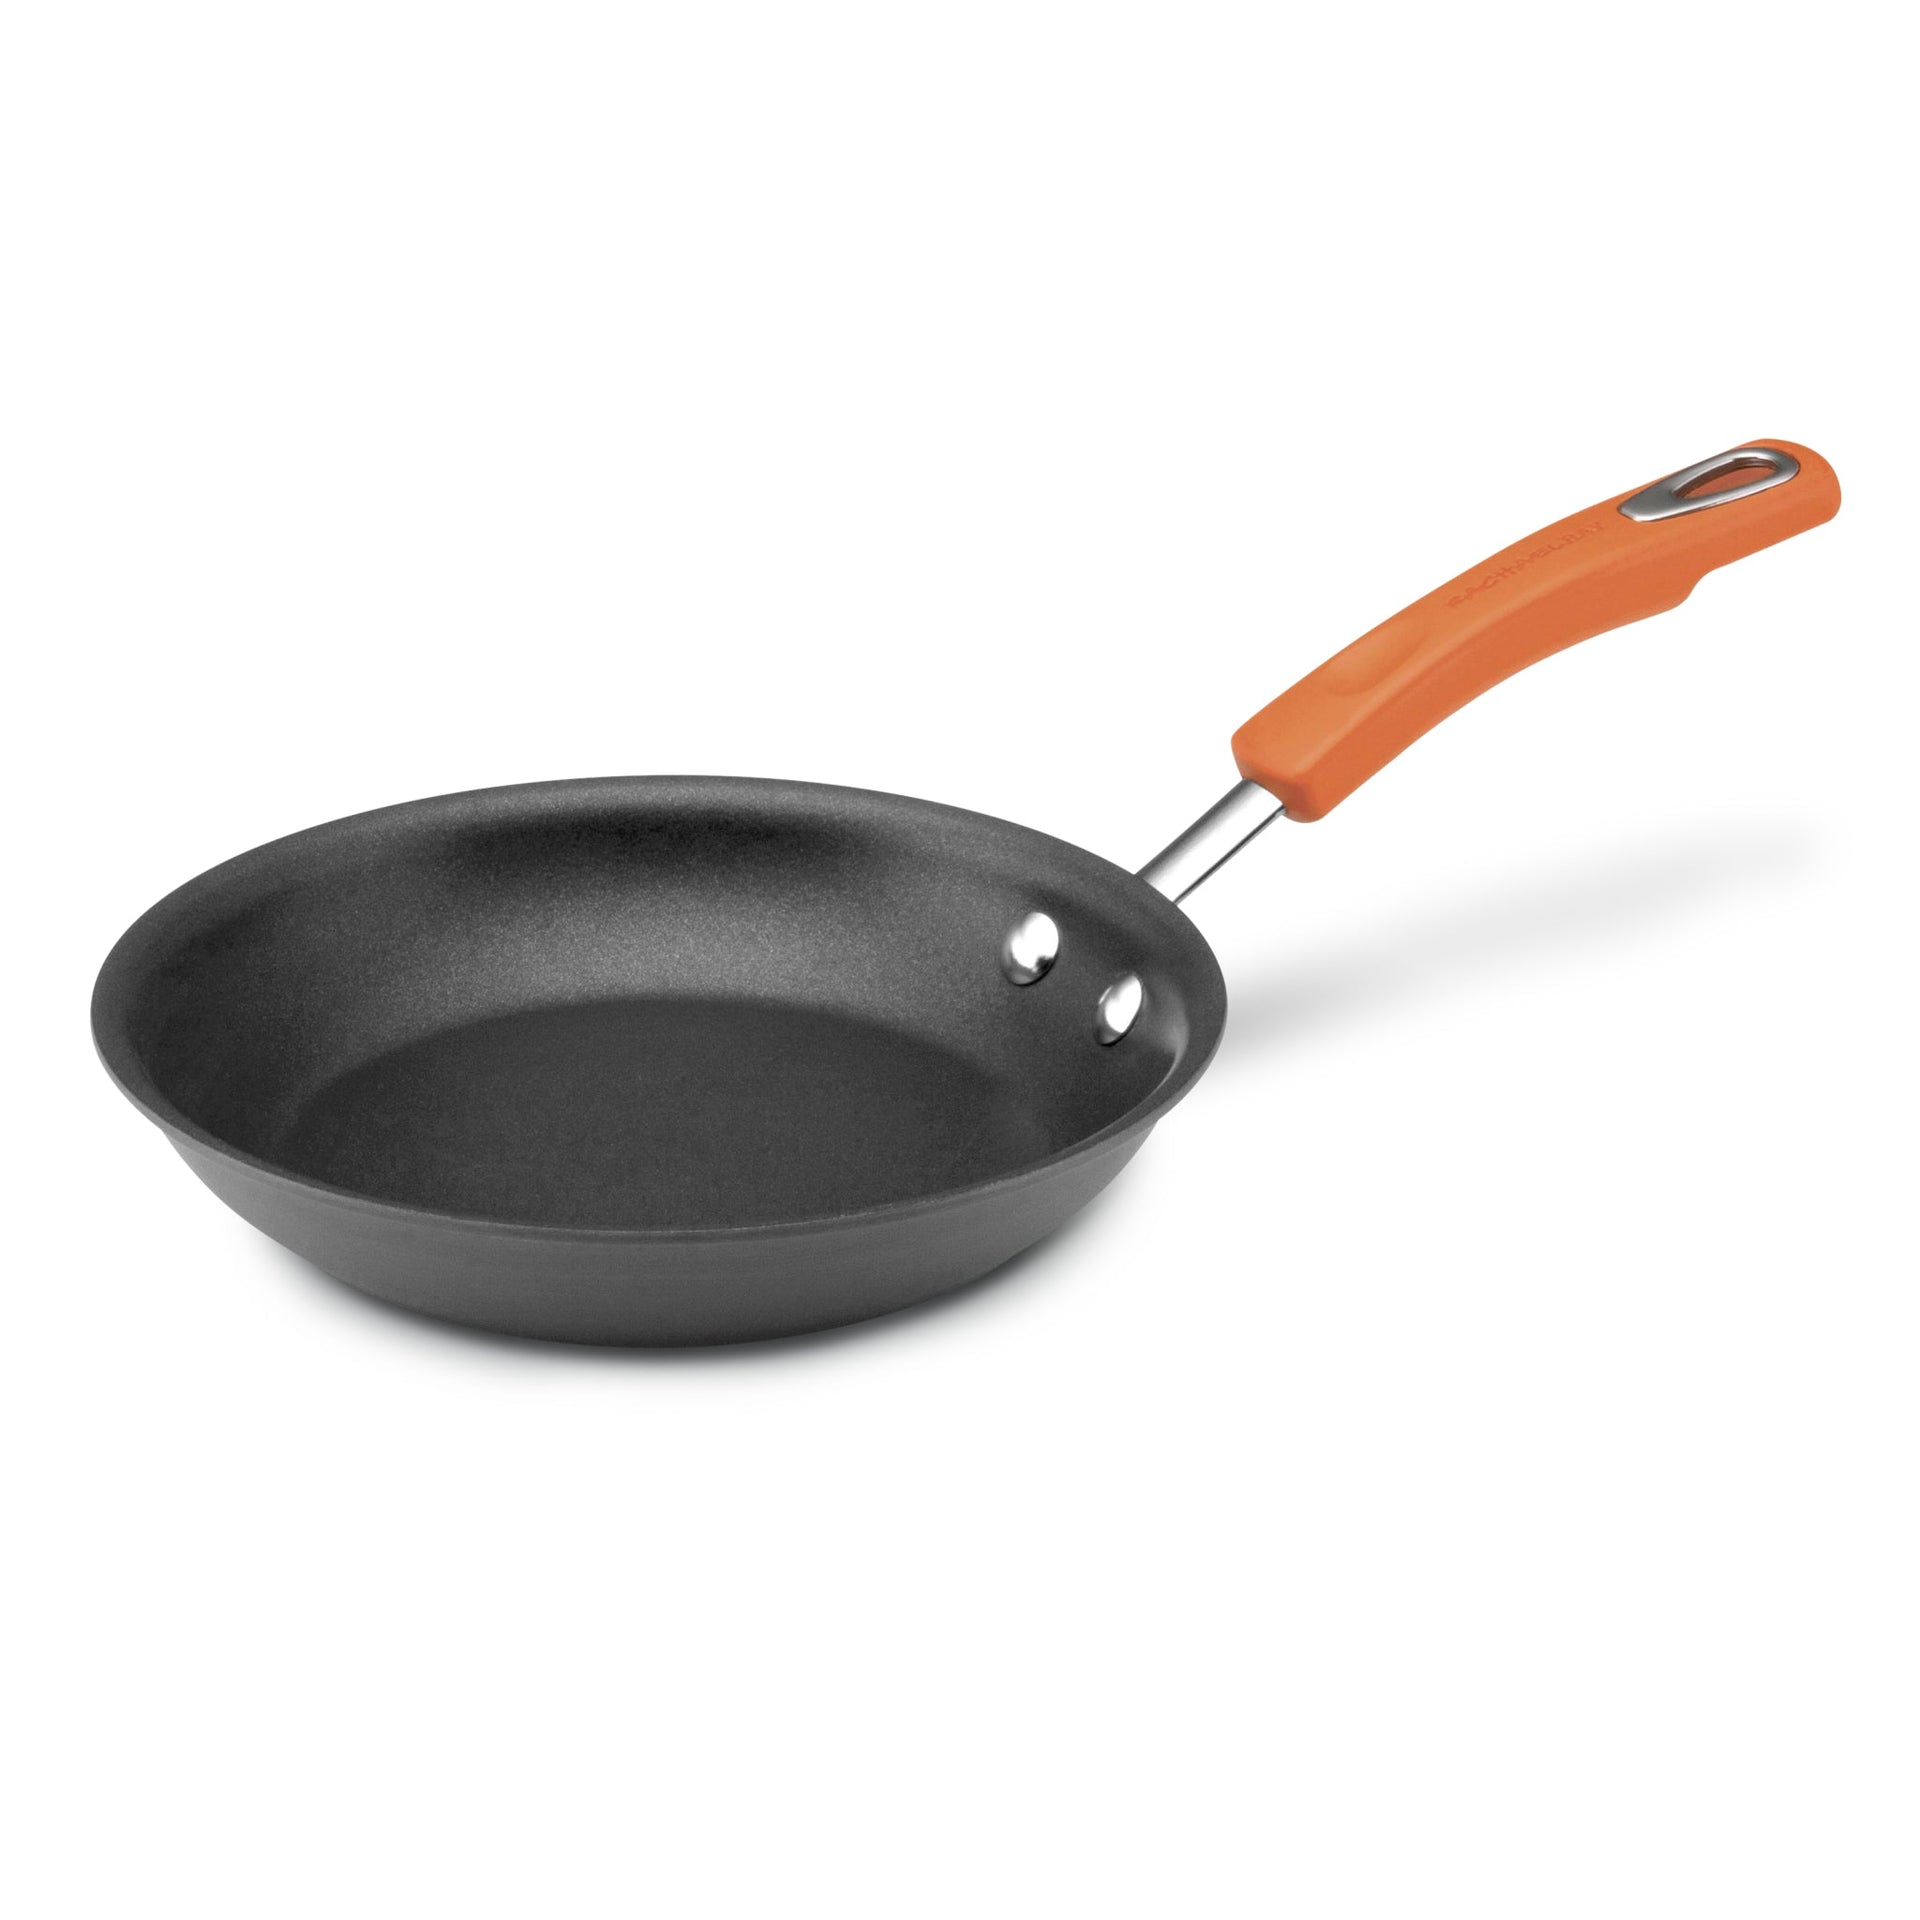 Up To 60% Off on Rachael Ray Cookware Set